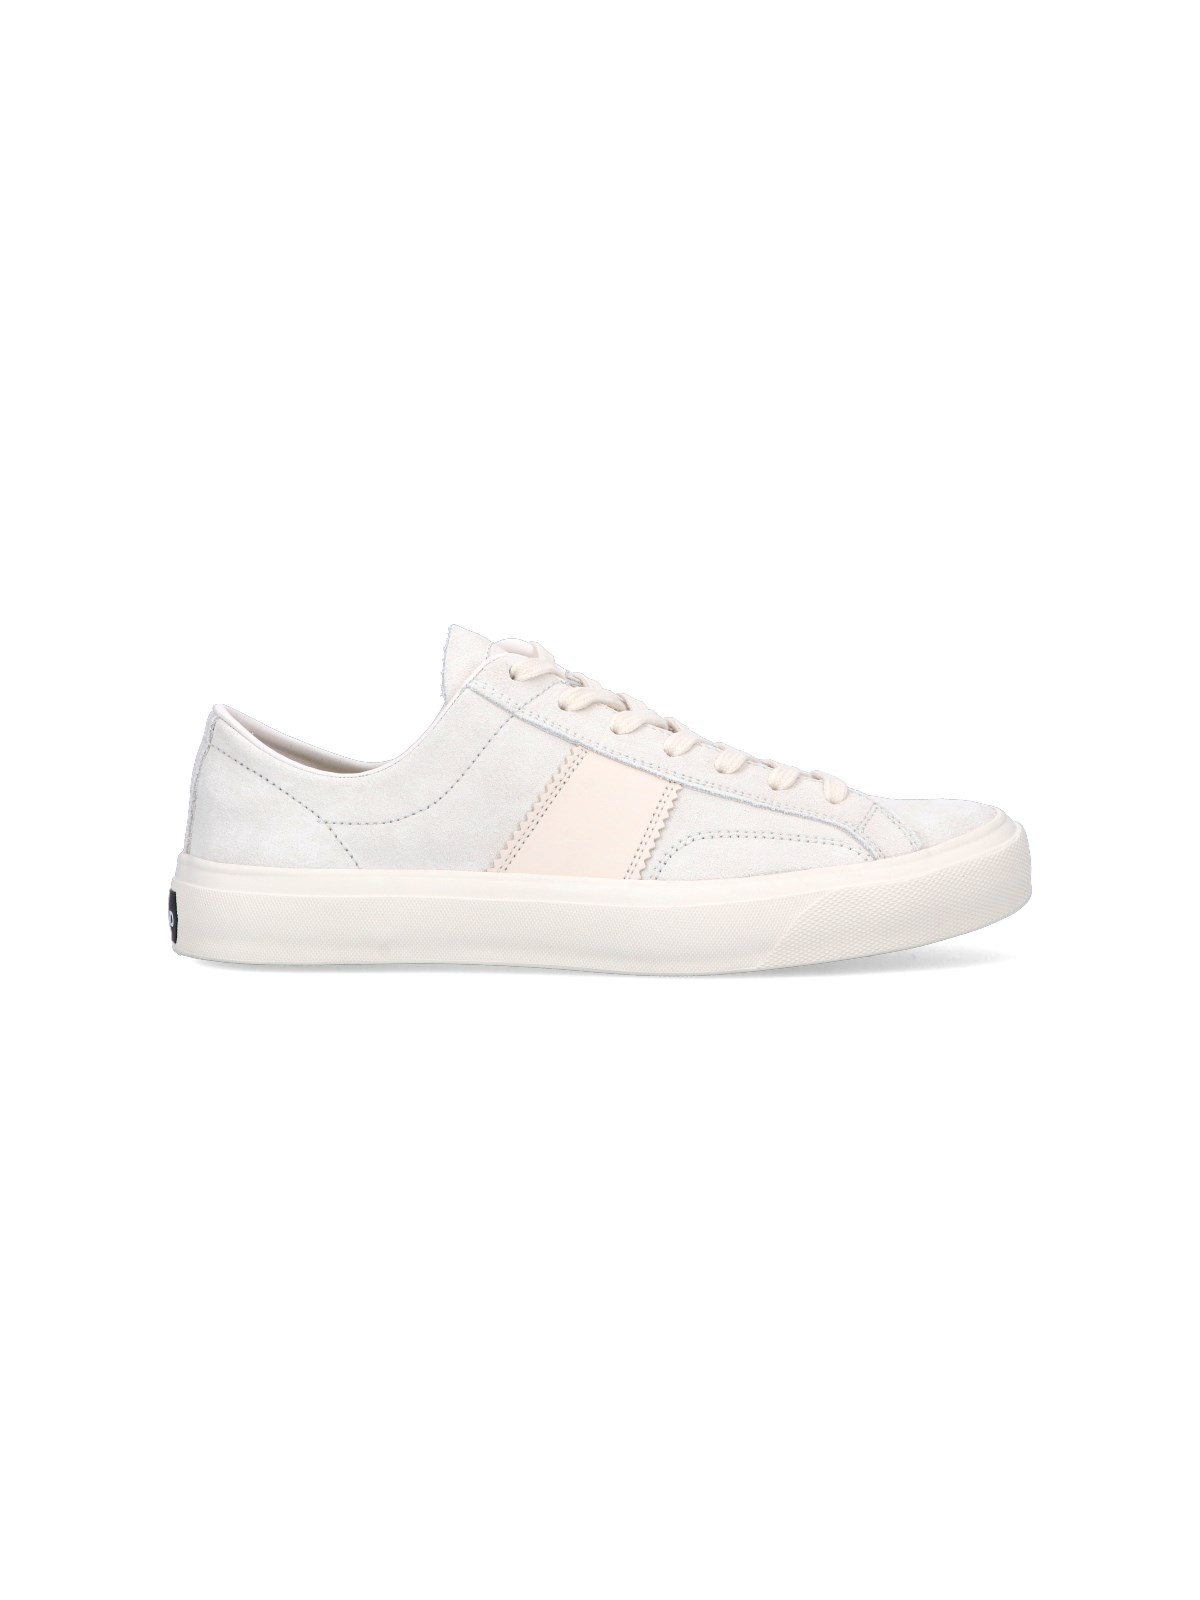 Tom Ford 'cambdridge' Sneakers In White